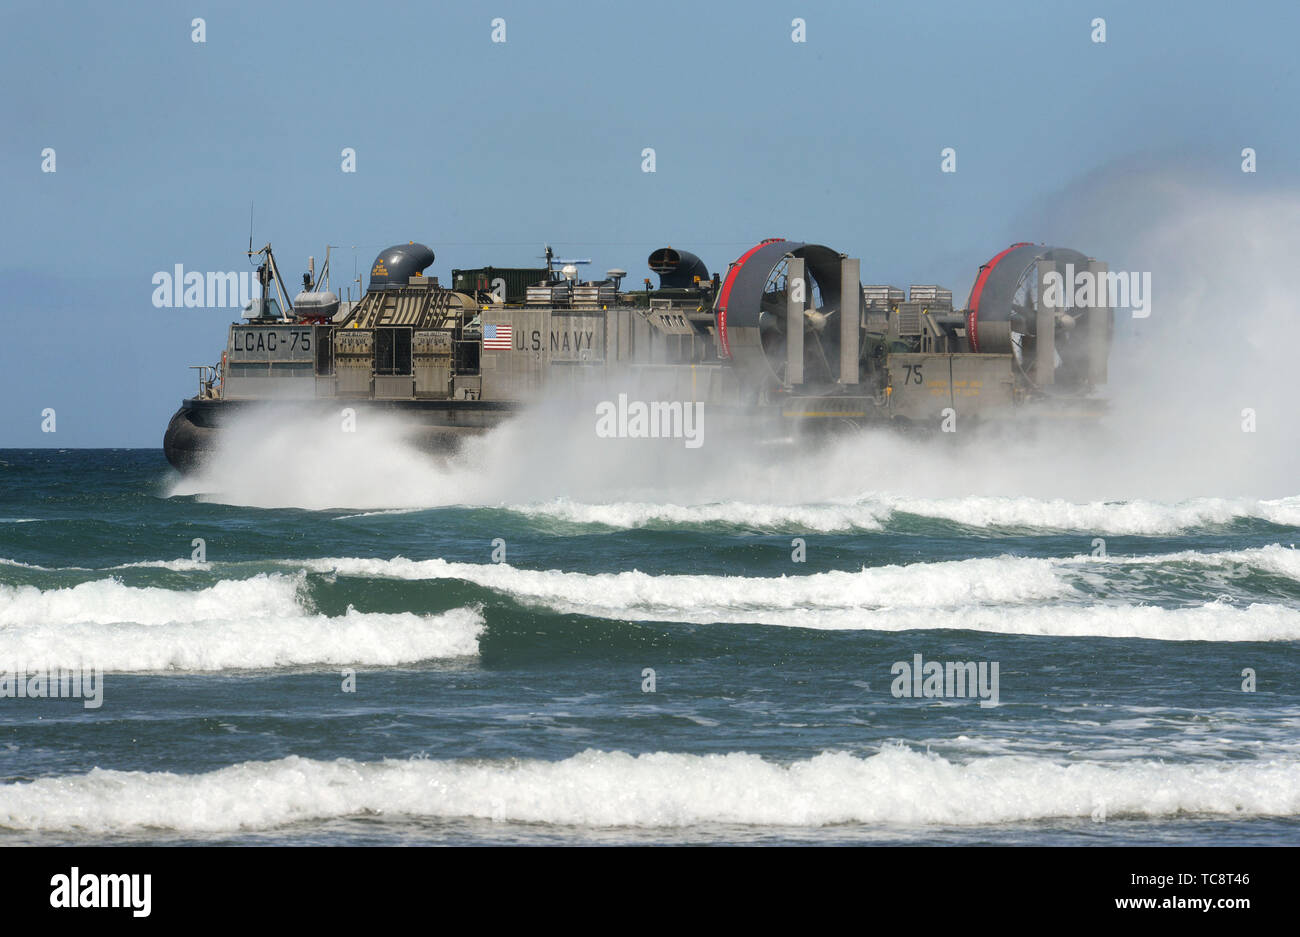 A U.S. Navy (Landing Craft Air Cushion) LCAC-75 leaves the shore at the Sunset Beach area near Warrenton, Oregon, June 3, 2019. In addition to the beach landings by the hovercraft vehicles, community leaders, emergency managers, military officials and other first responders toured the U.S.S. Anchorage to learn more about the Navy capabilities to assist in mass casualty scenarios.  (National Guard photo by John Hughel, Oregon Military Department) Stock Photo